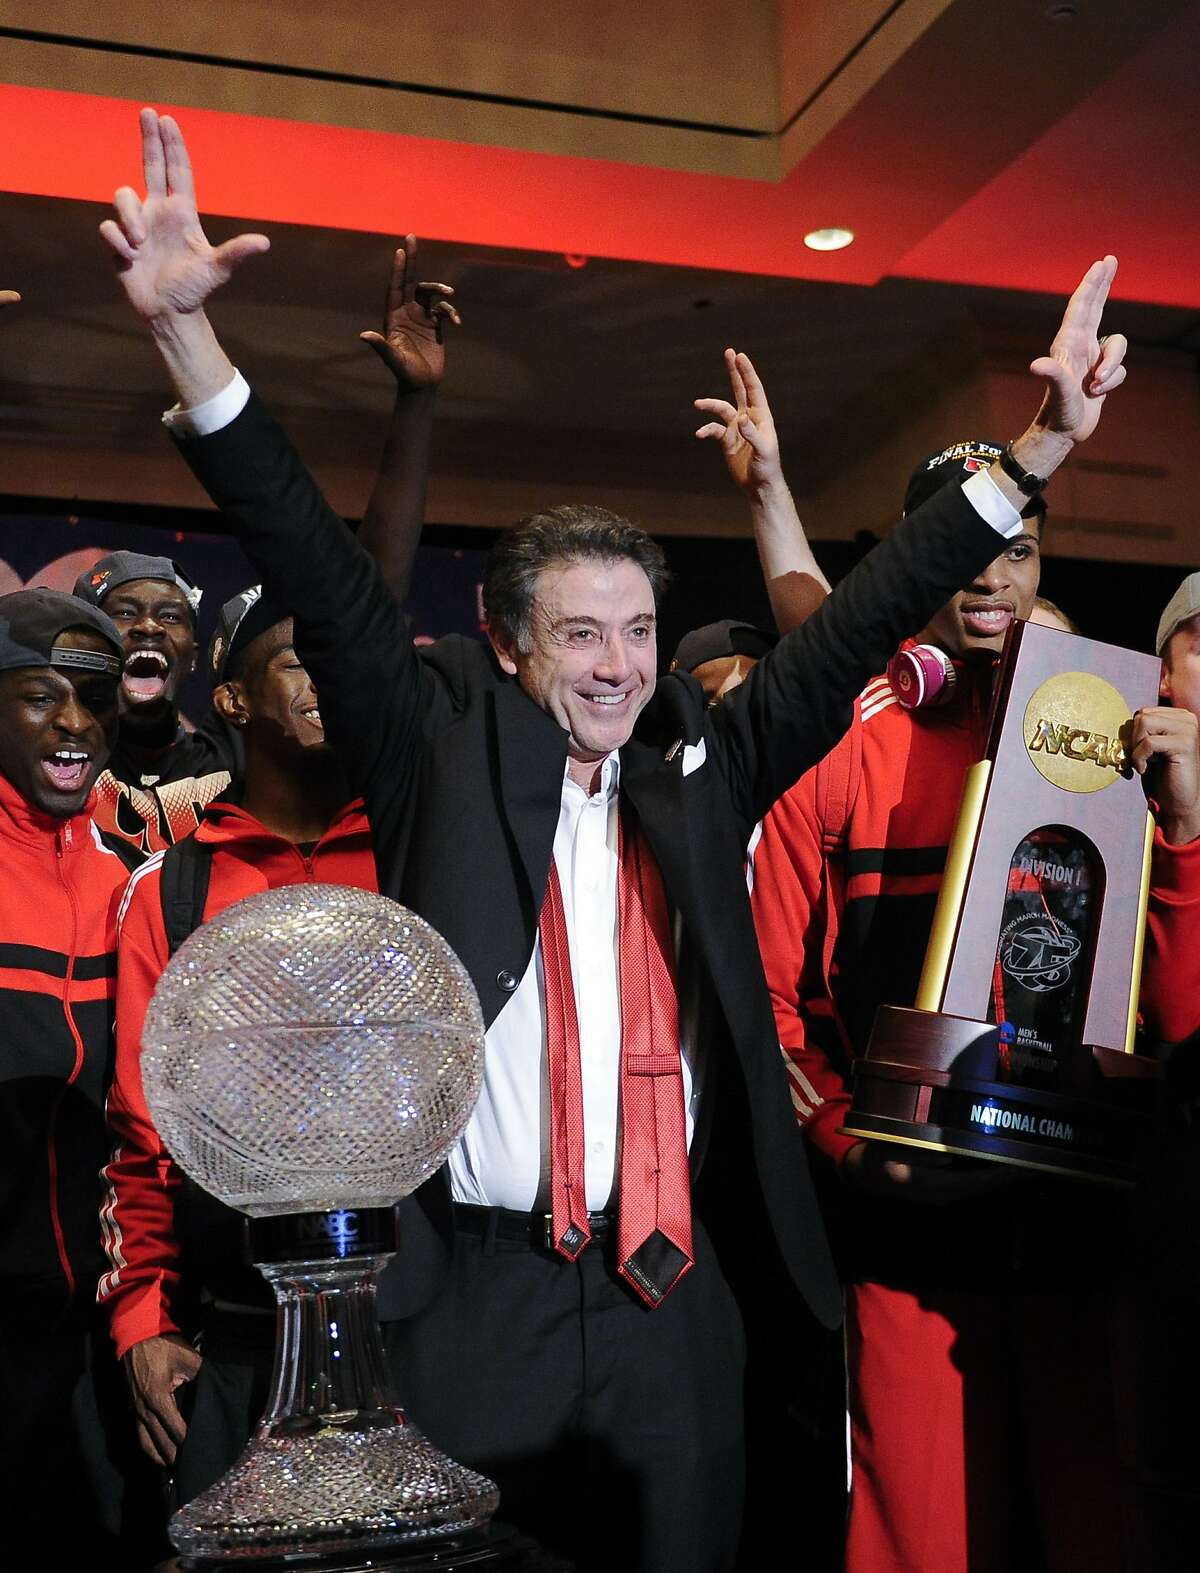 FILE - In this April 8, 2013, file photo, Louisville coach Rick Pitino celebrates at the the trophy ceremony after winning the NCAA Final Four tournament college basketball championship game against Michigan, in Atlanta. Louisville must vacate its 2013 men�s basketball title following an NCAA appeals panel�s decision to uphold sanctions against the men�s program for violations committed in a sex scandal. The Cardinals will have to vacate 123 victories including the championship, and return millions in postseason revenue. The decision announced on Tuesday, Feb. 20, 2018, by the governing body�s Infraction Appeals Committee ruled that the NCAA has the authority to take away championships for what it considers major rule violations. (AP Photo/John Amis, File)